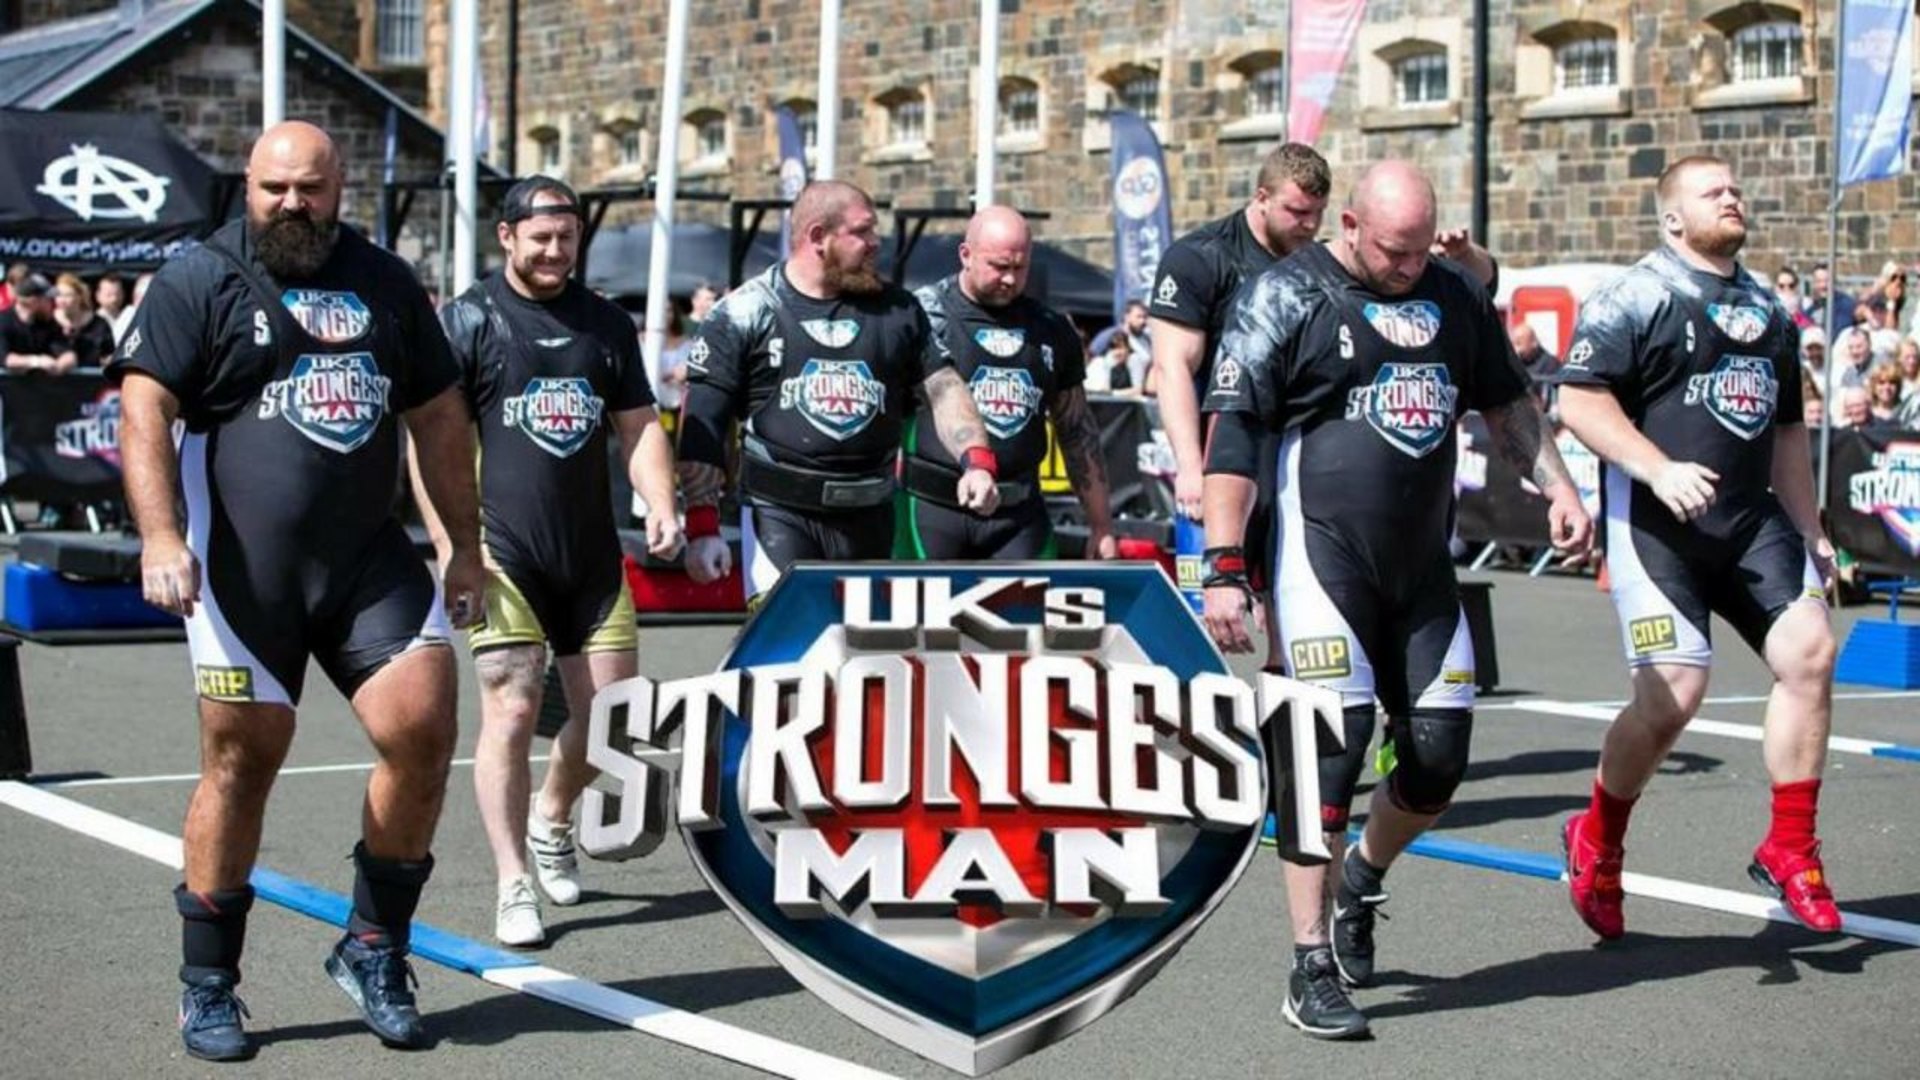 UK's Strongest Man countdown how many days until the next episode